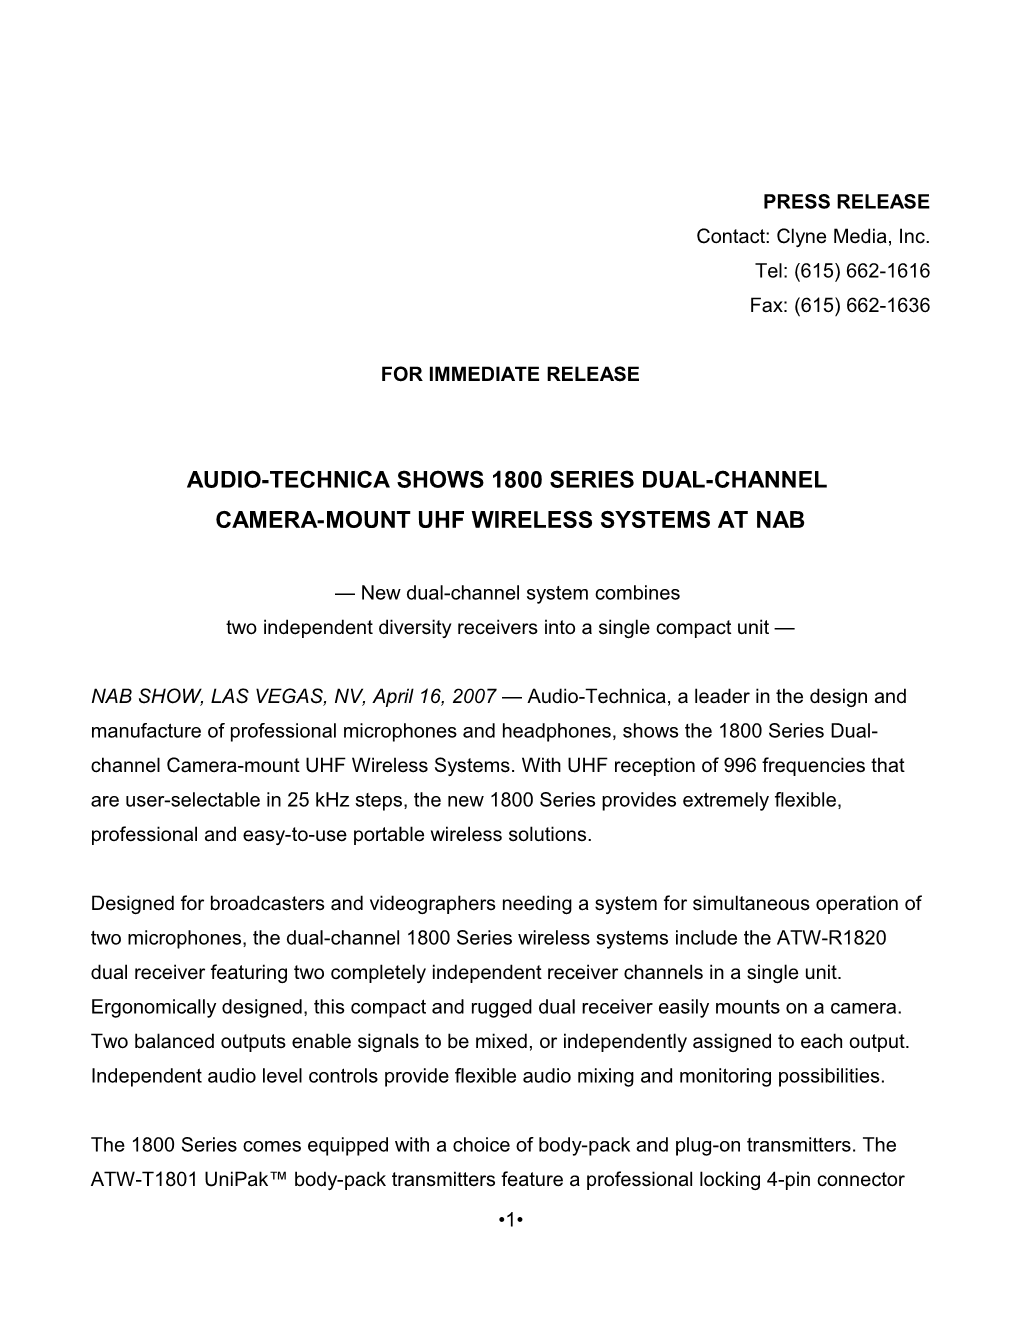 Audio-Technica Shows 1800 Series Dual-Channel